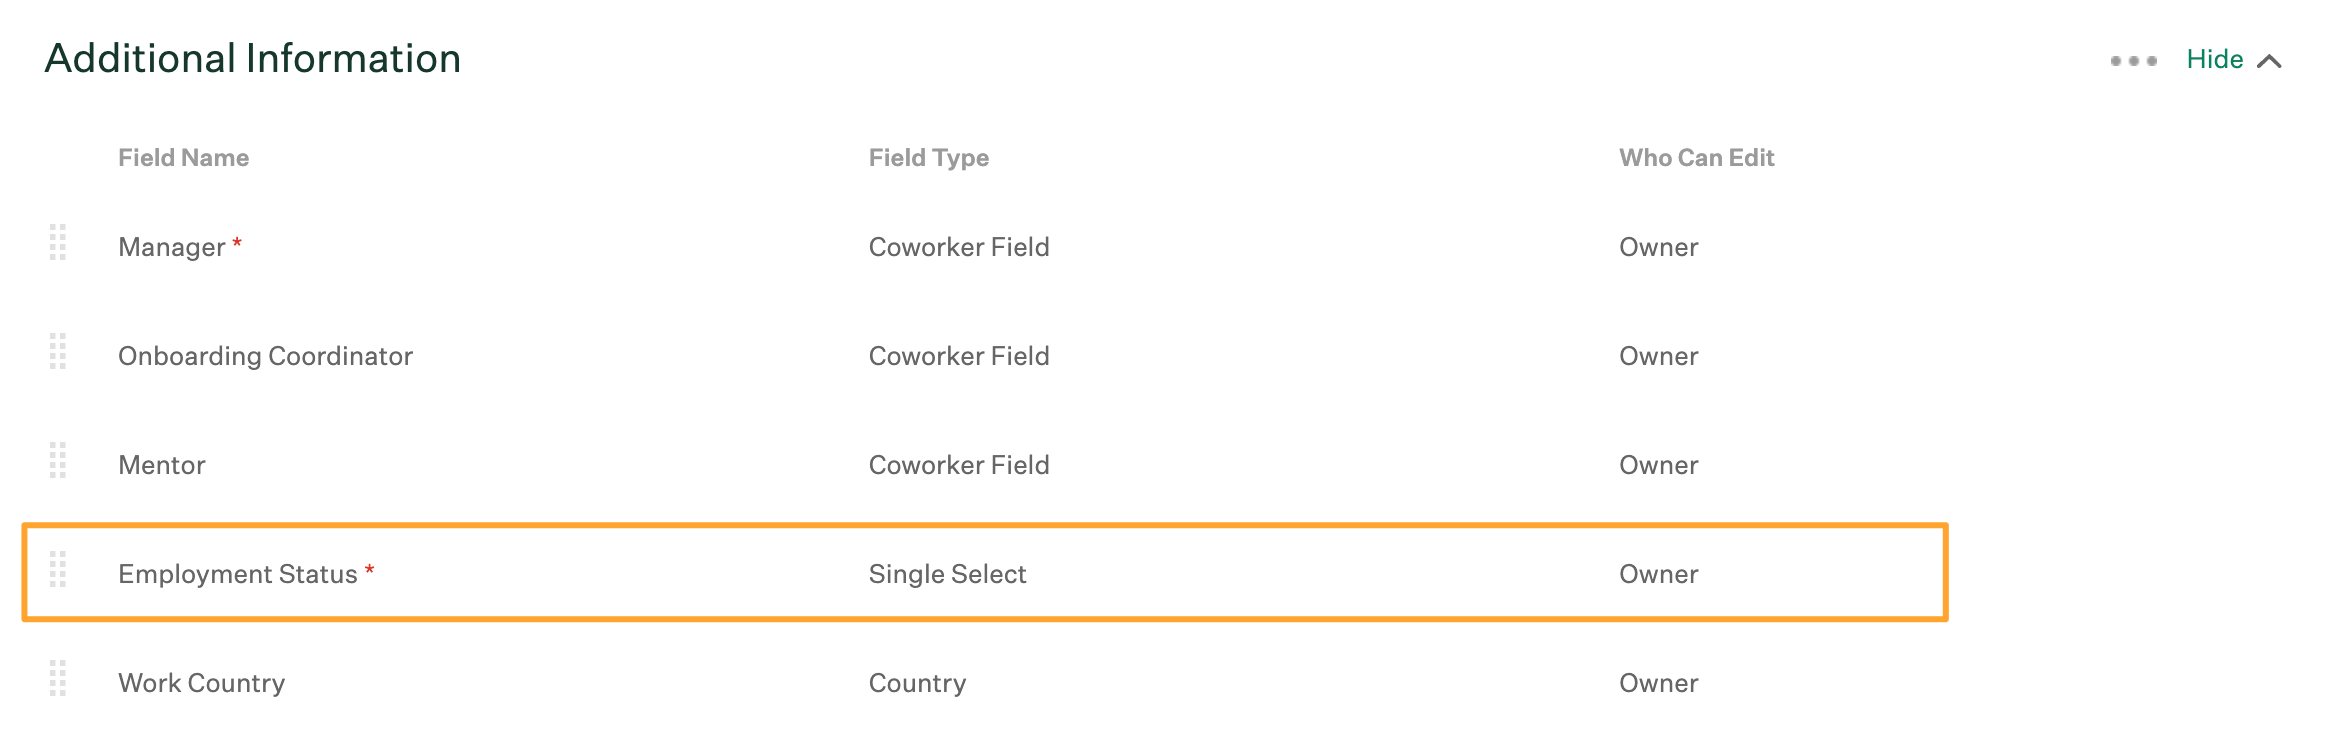 Employment Status field listed under Additional Information on the Fields page in Settings